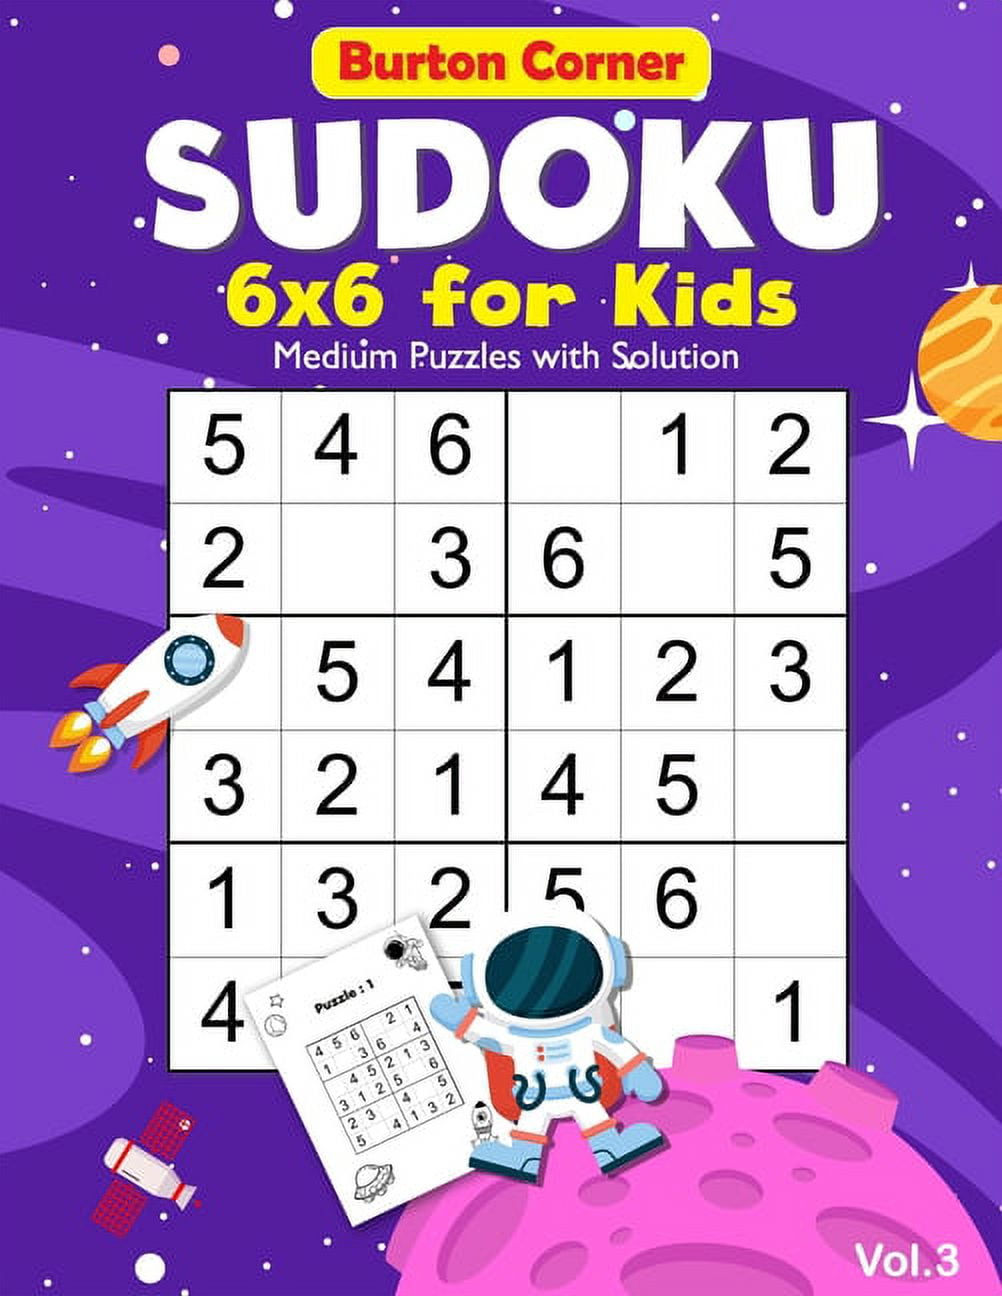 Set of Sudoku 4x4 Puzzles for Kids, 6000 Sudoku Puzzles with Solutions